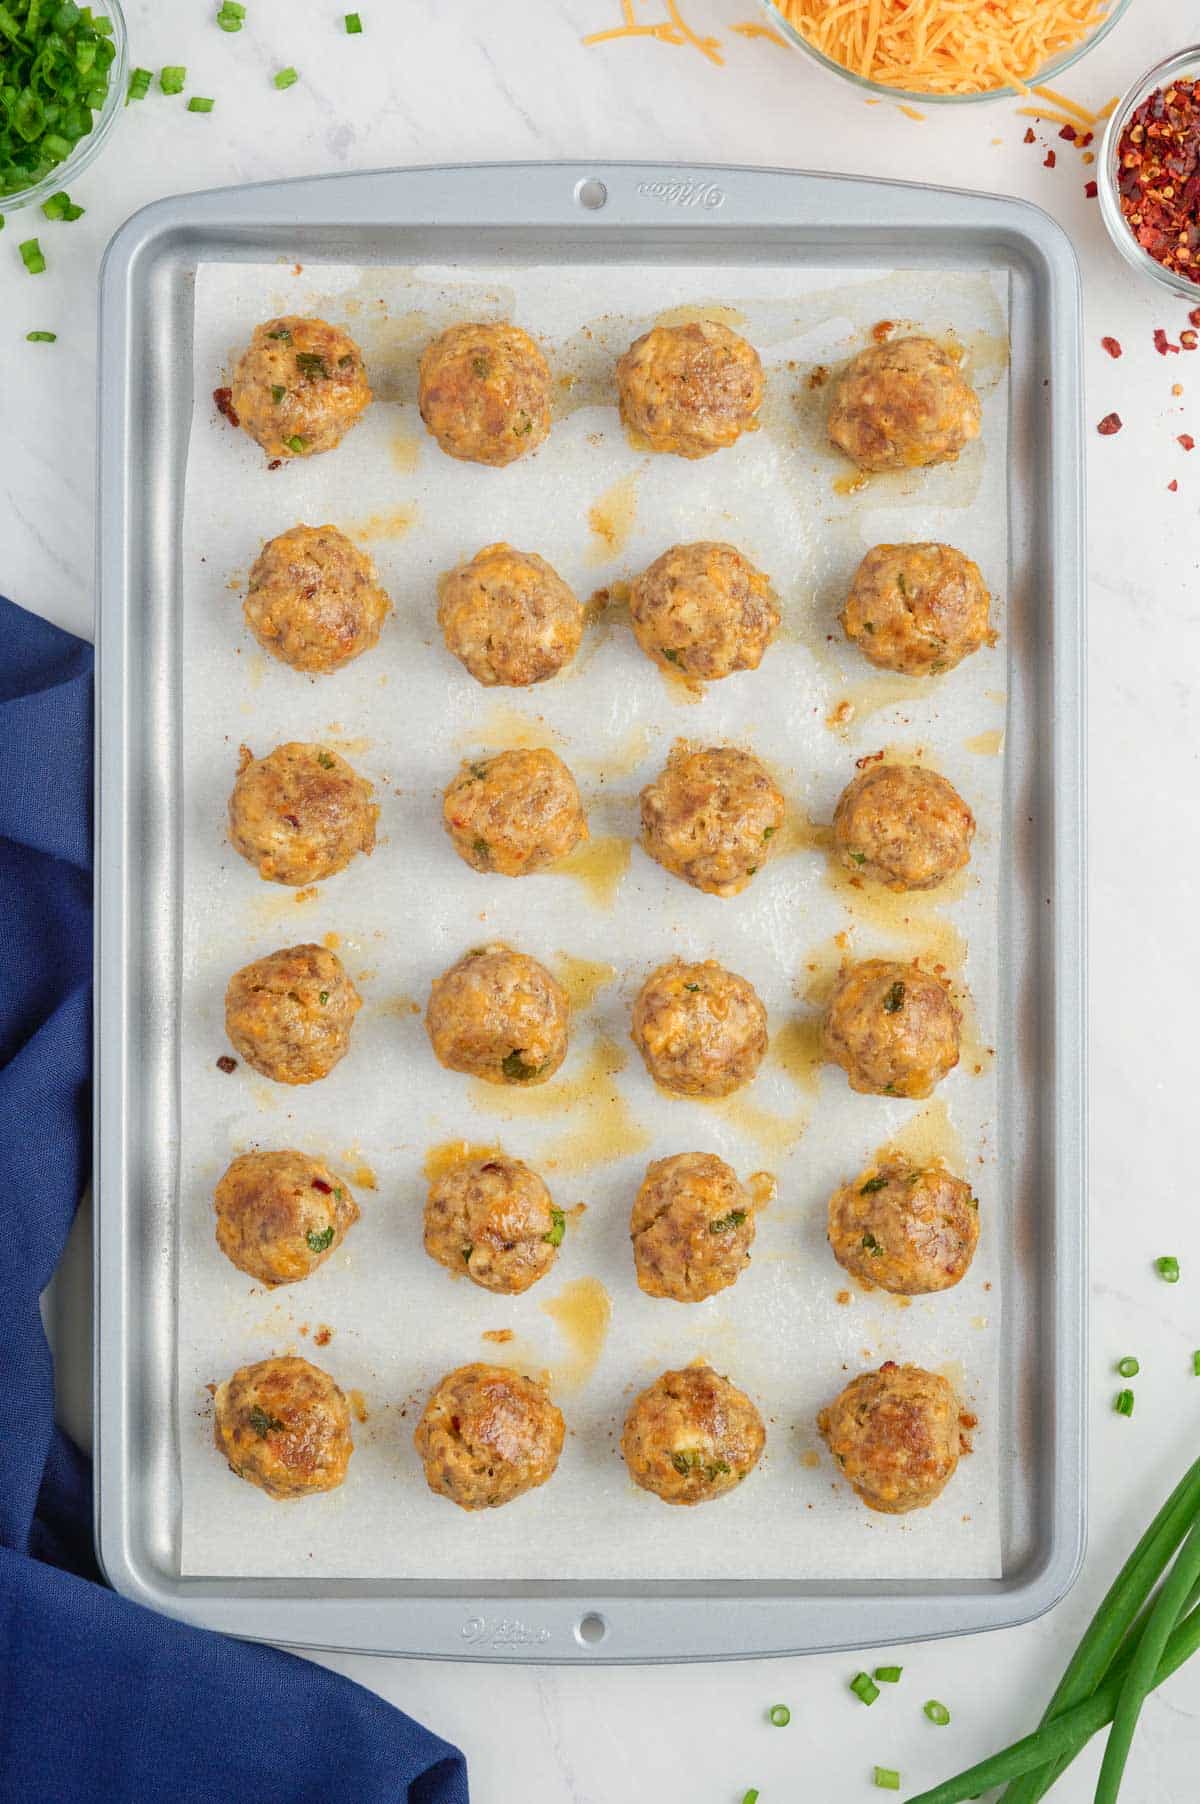 Golden brown sausage balls are baked in the oven.